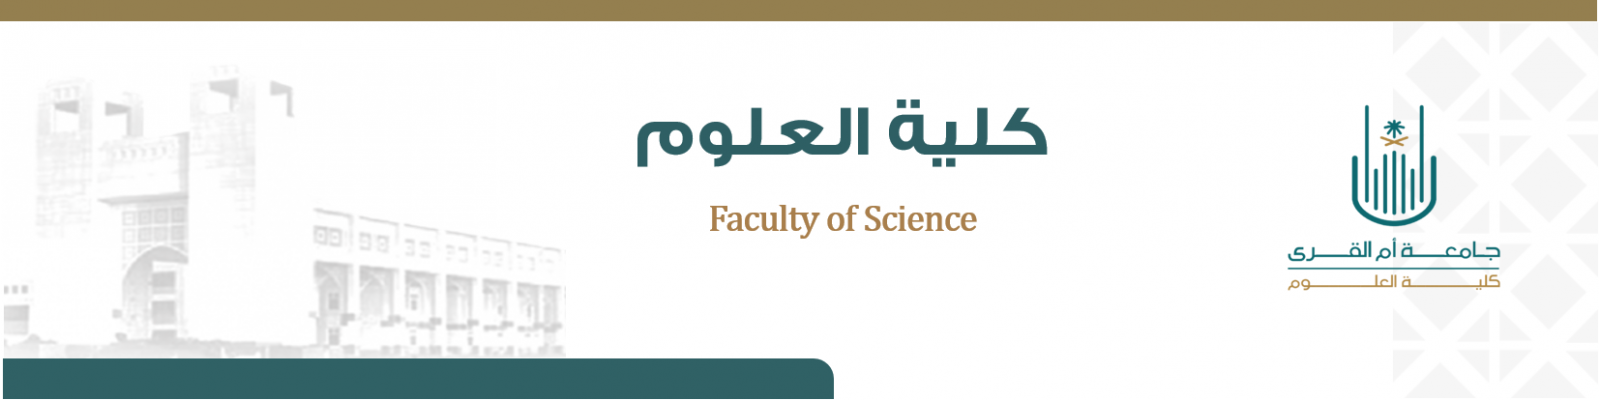 College of Applied Sciences